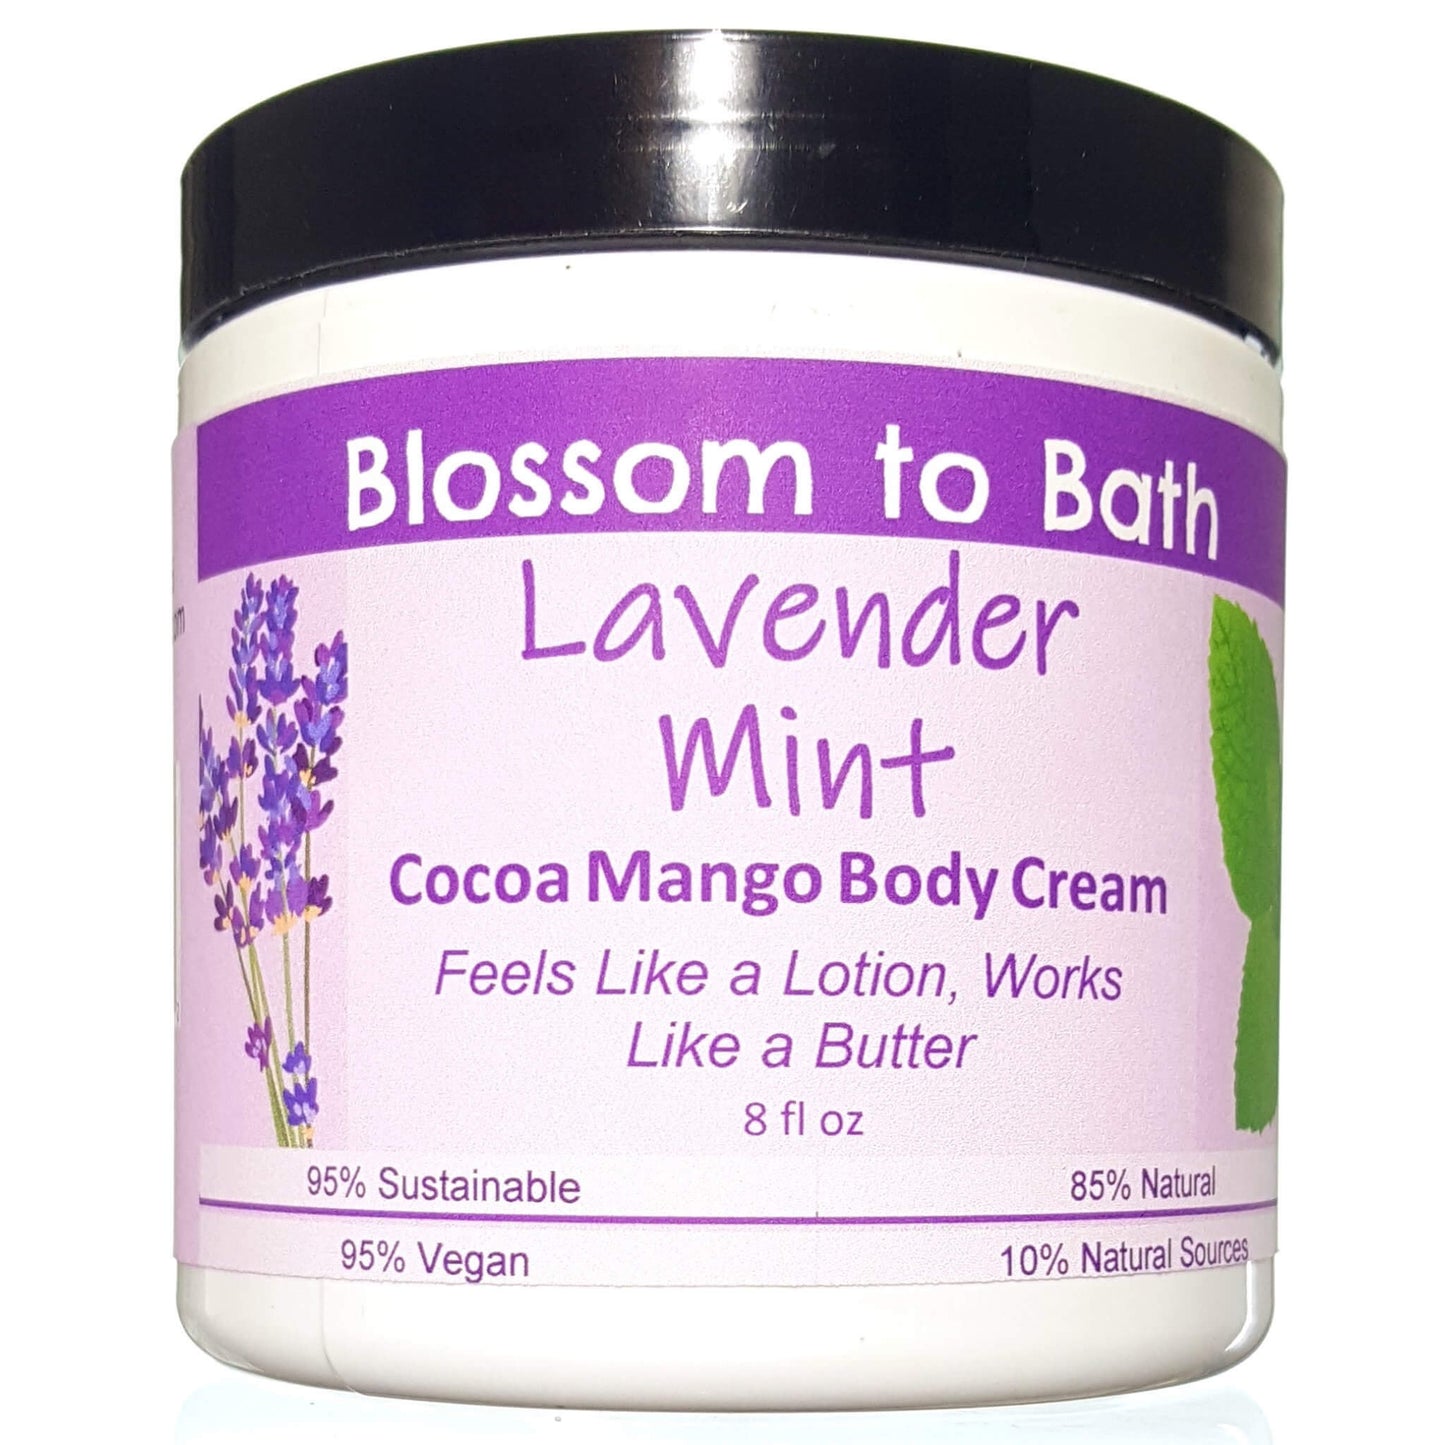 Buy Blossom to Bath Lavender Mint Cocoa Mango Body Cream from Flowersong Soap Studio.  Rich organic butters luxury soften and moisturize even the roughest skin all day  A cheerfully relaxing combination of lavender and peppermint.